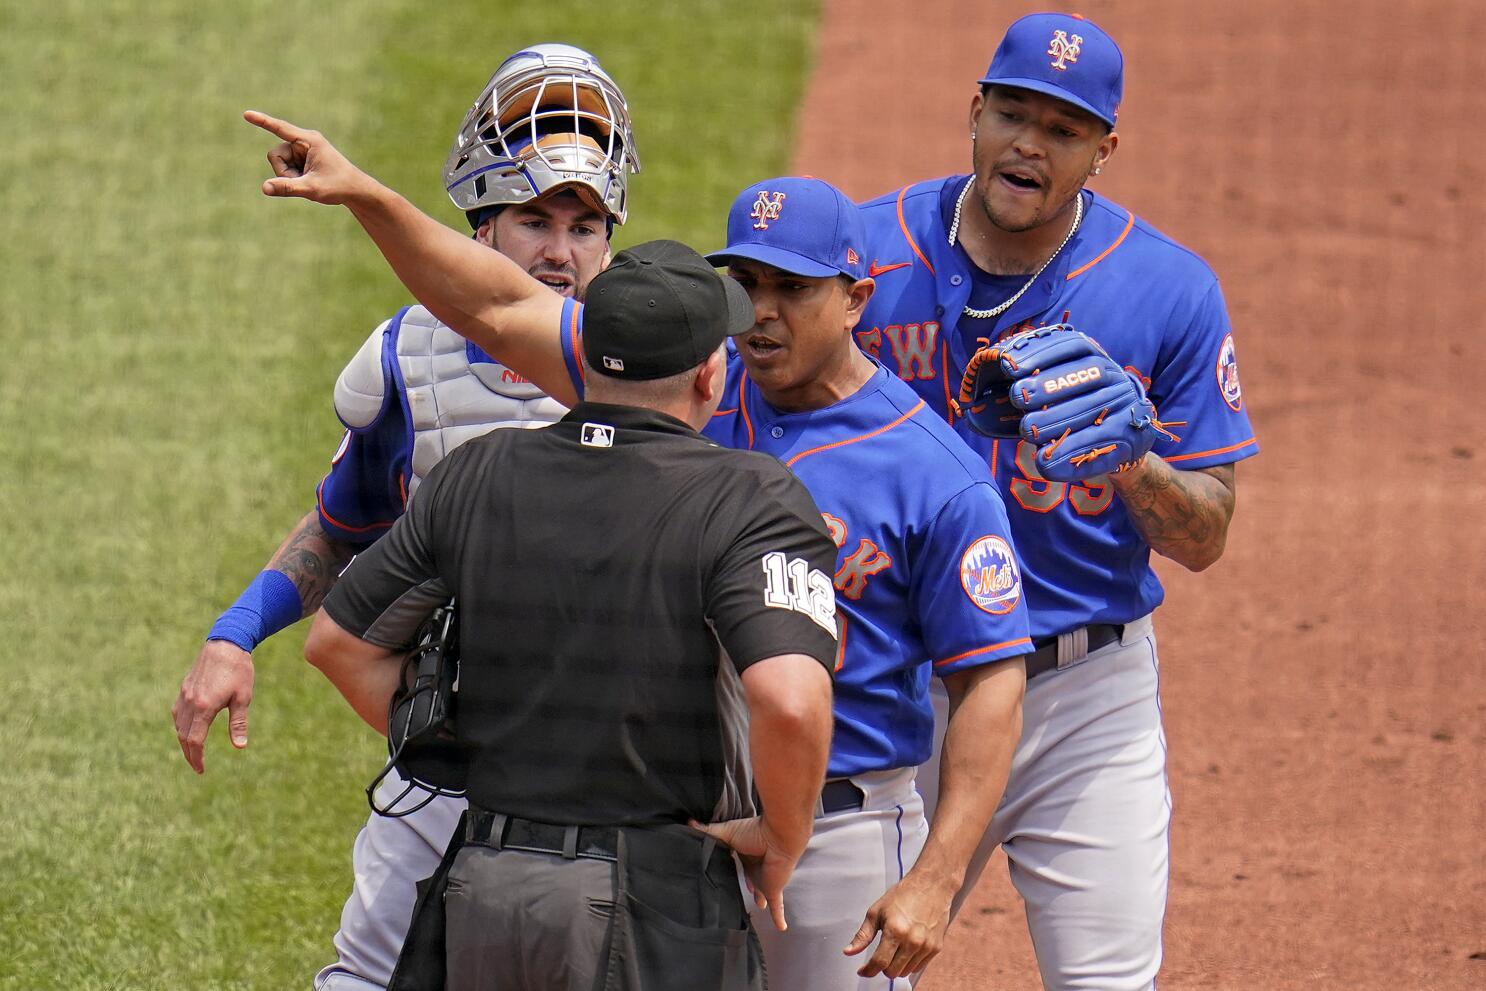 Mets' Rojas suspended two games for outburst, Local Sports